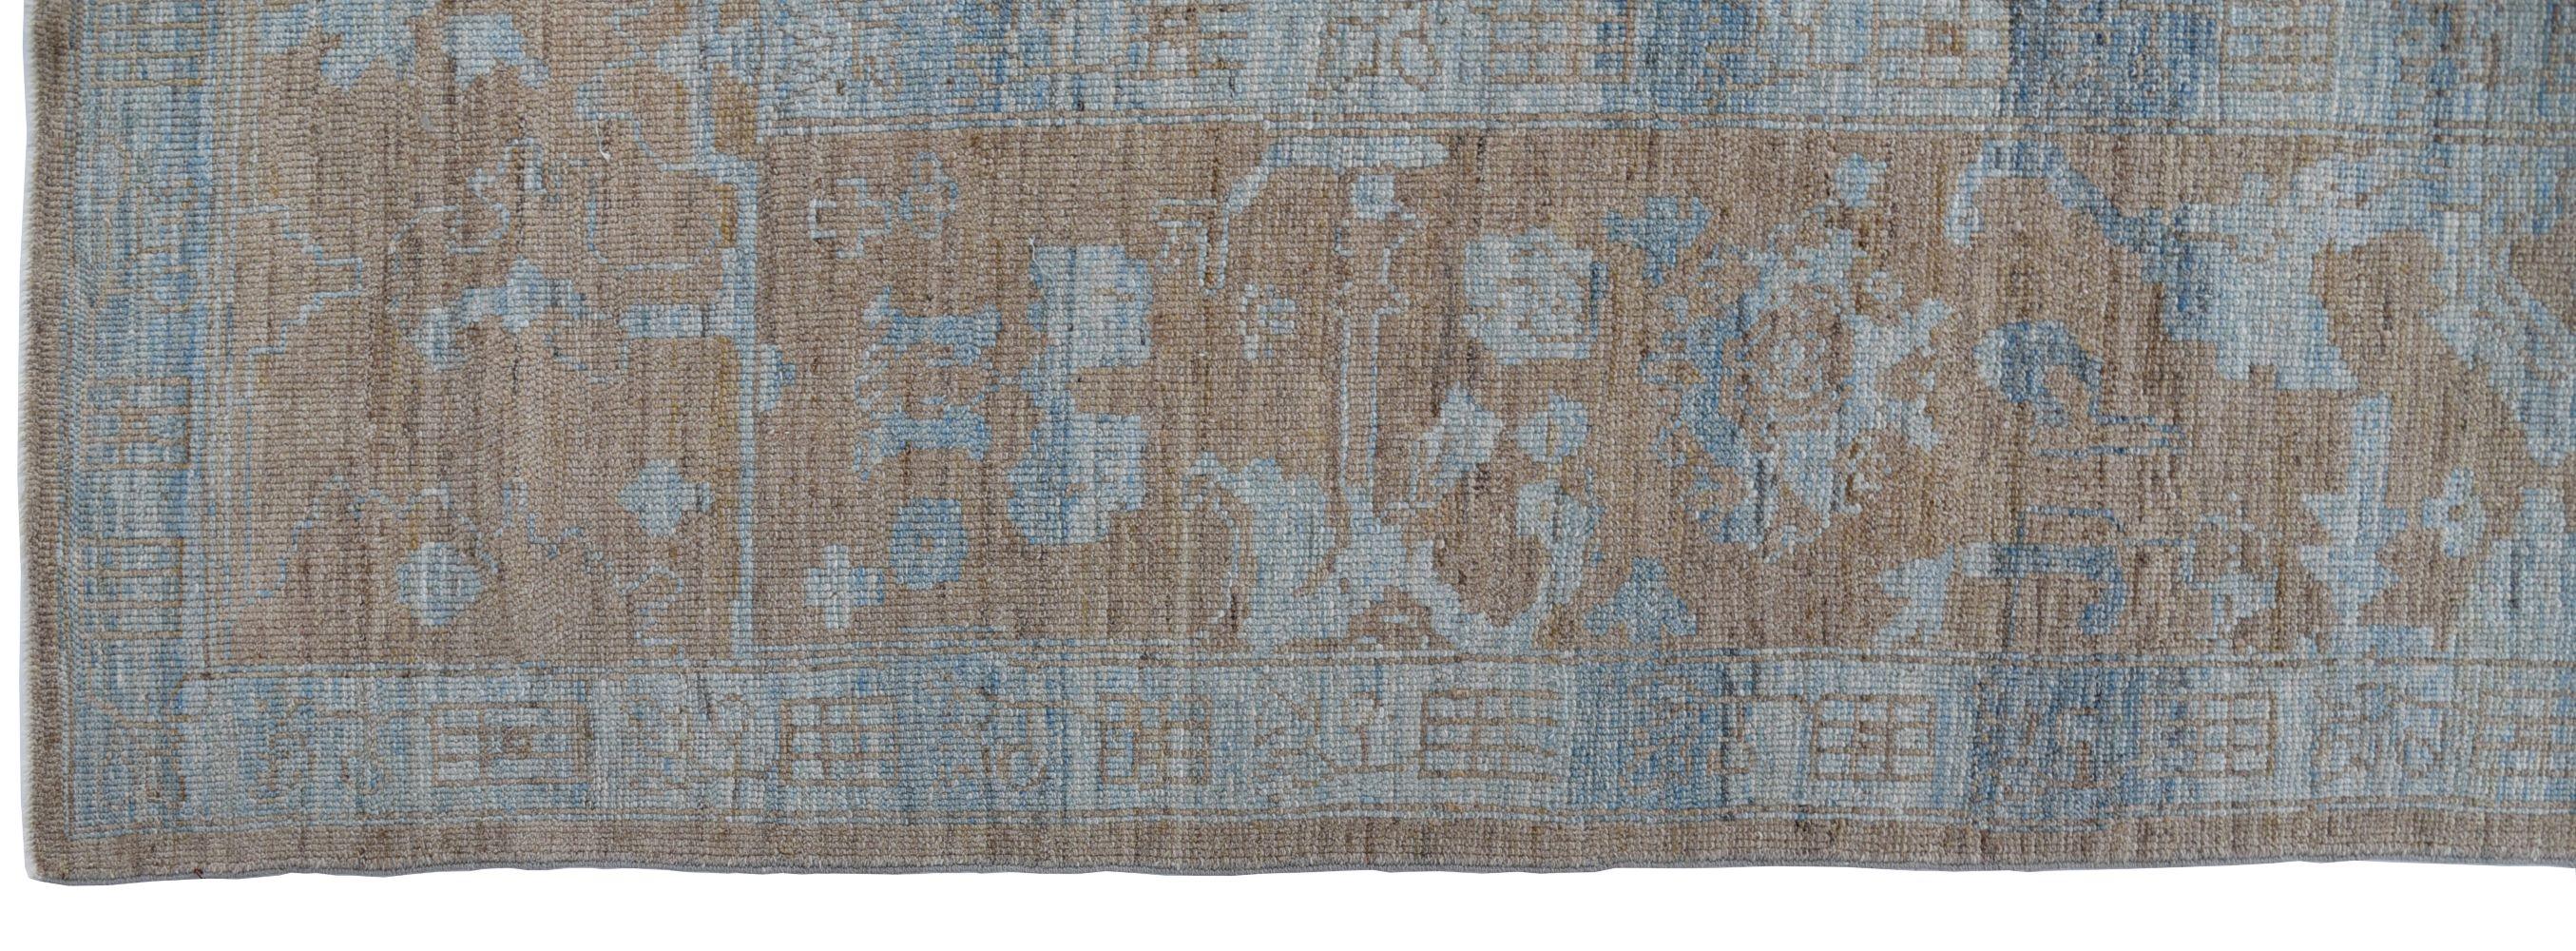 This gorgeous earthy modern Oushak rug uses neutral tones and has an abstract quality that would be perfect for a contemporary room setting. Oushak is a city in Turkey that has carpet weaving traditions that go back to the 15th and 16th centuries.